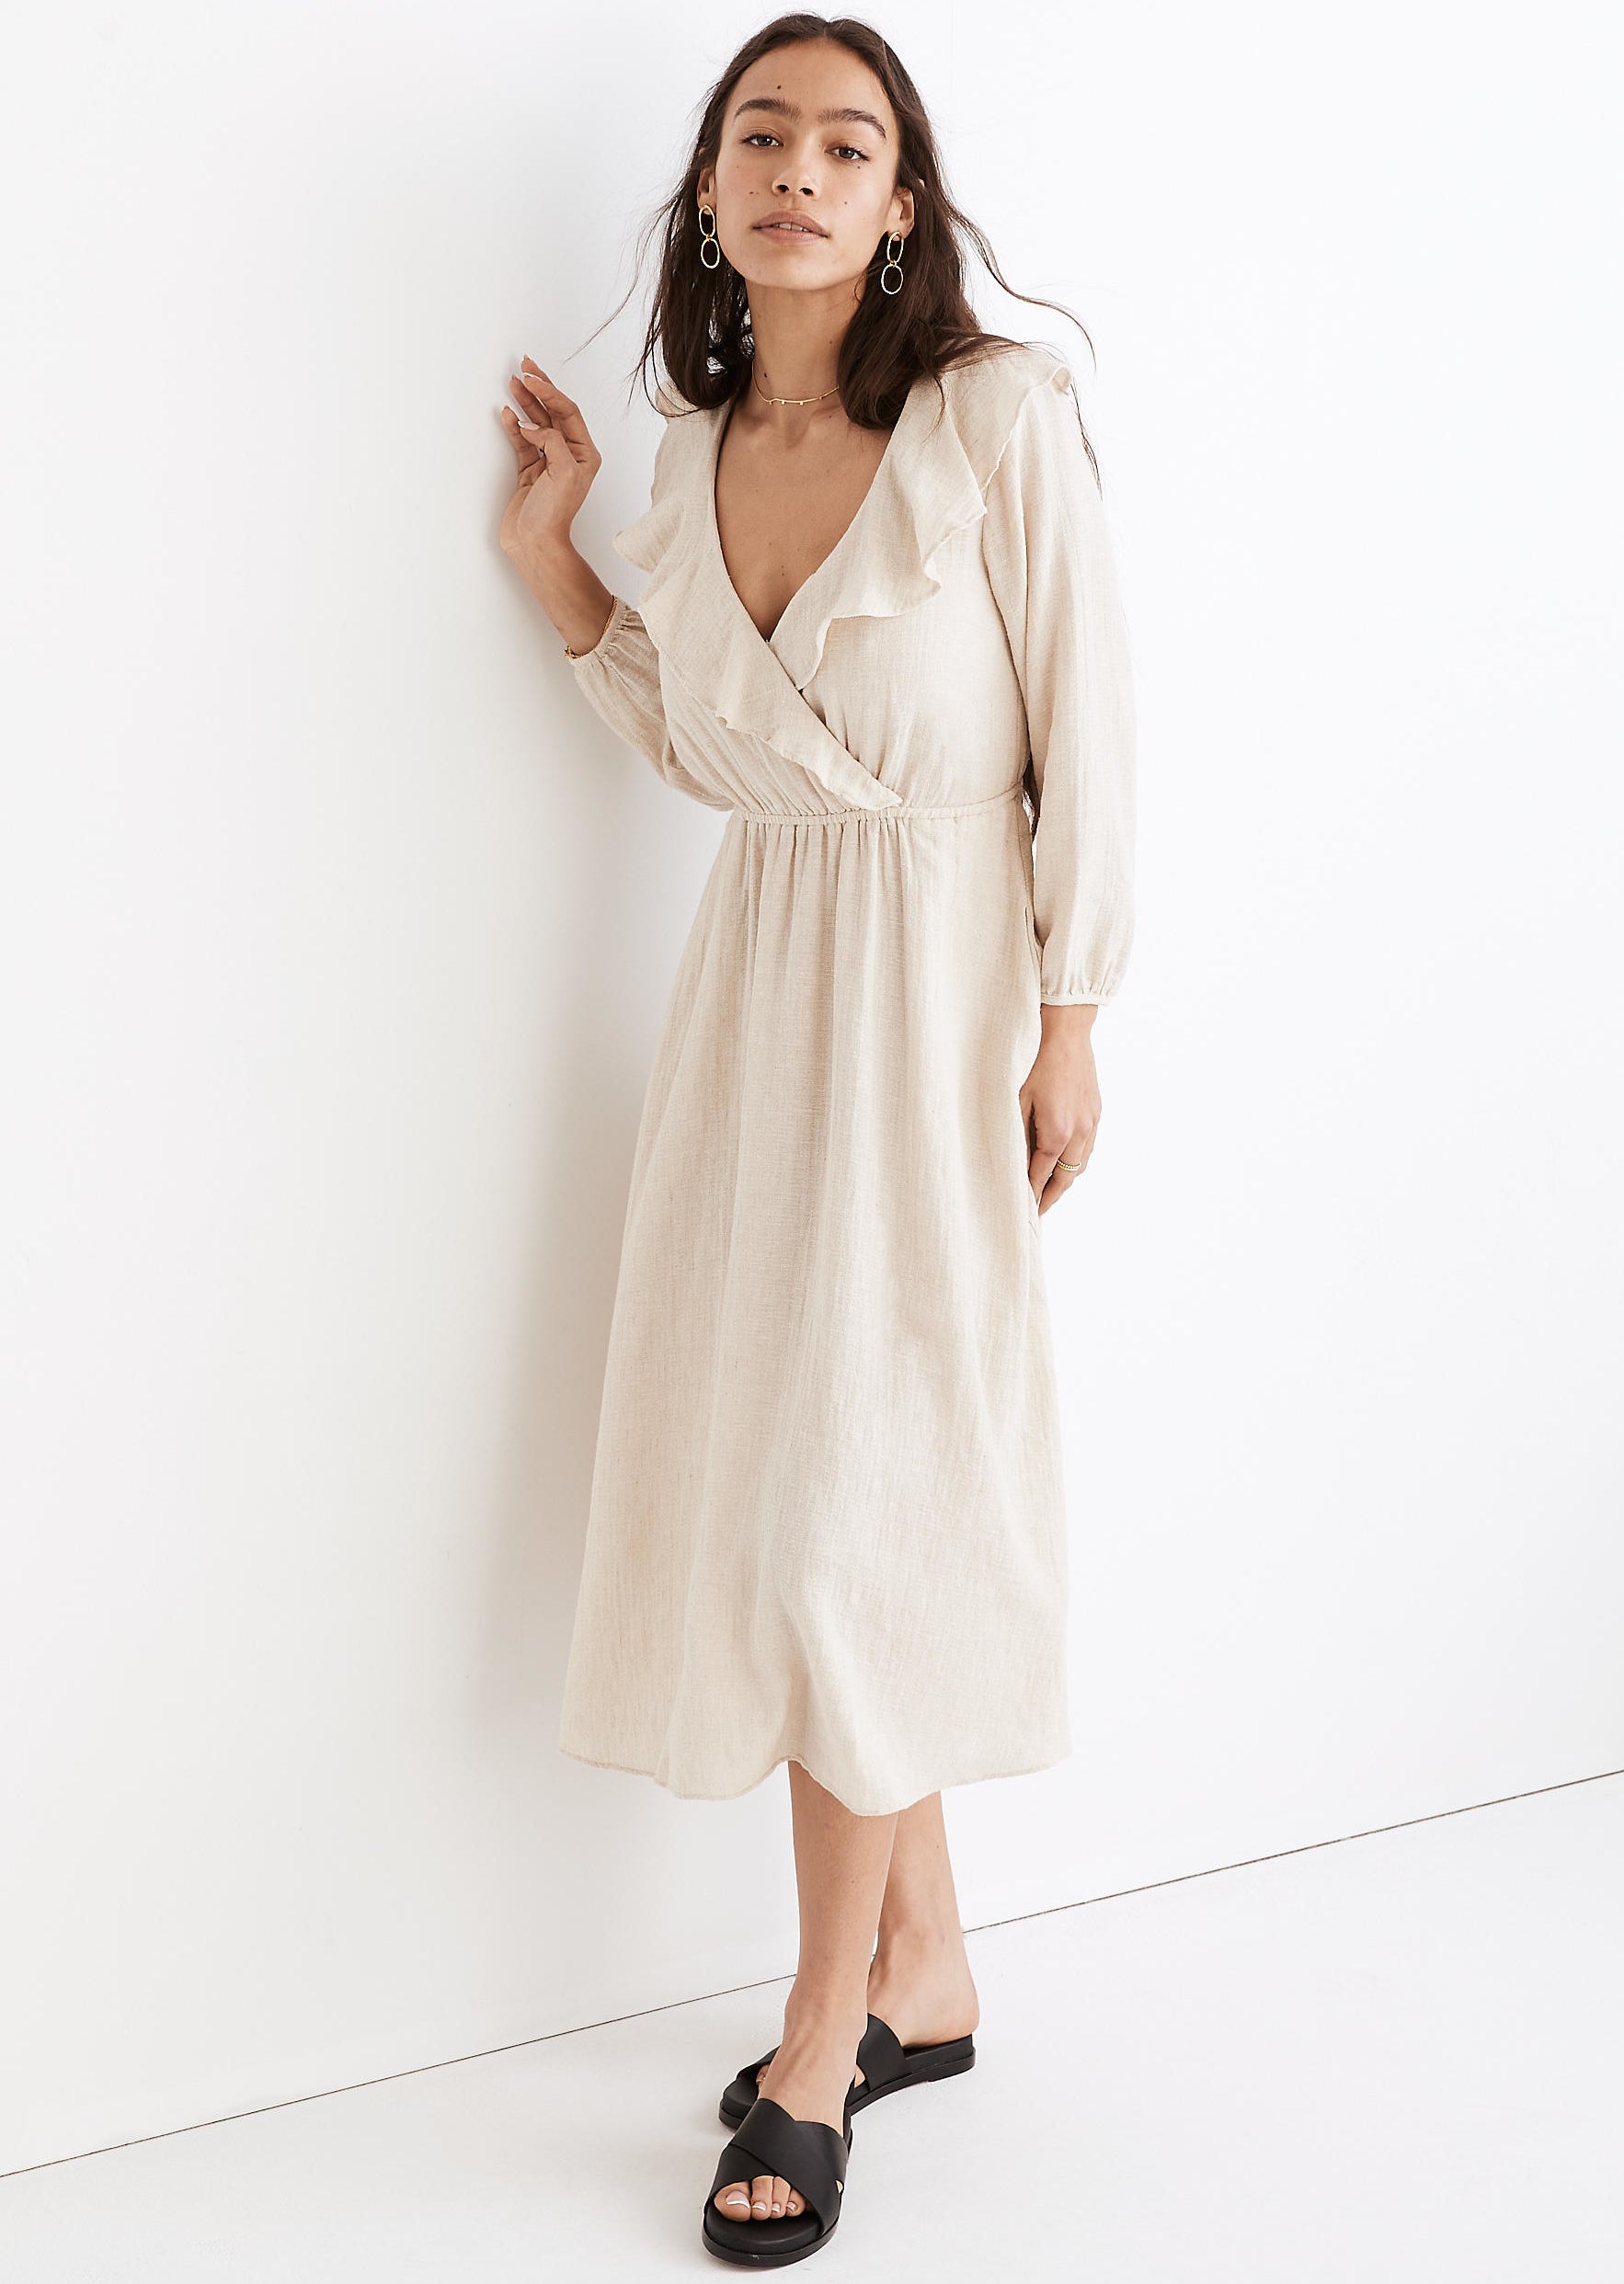 model in white v-neck midi dress with a layer of ruffles around the neckline and long sleeves with elastic at the wrists